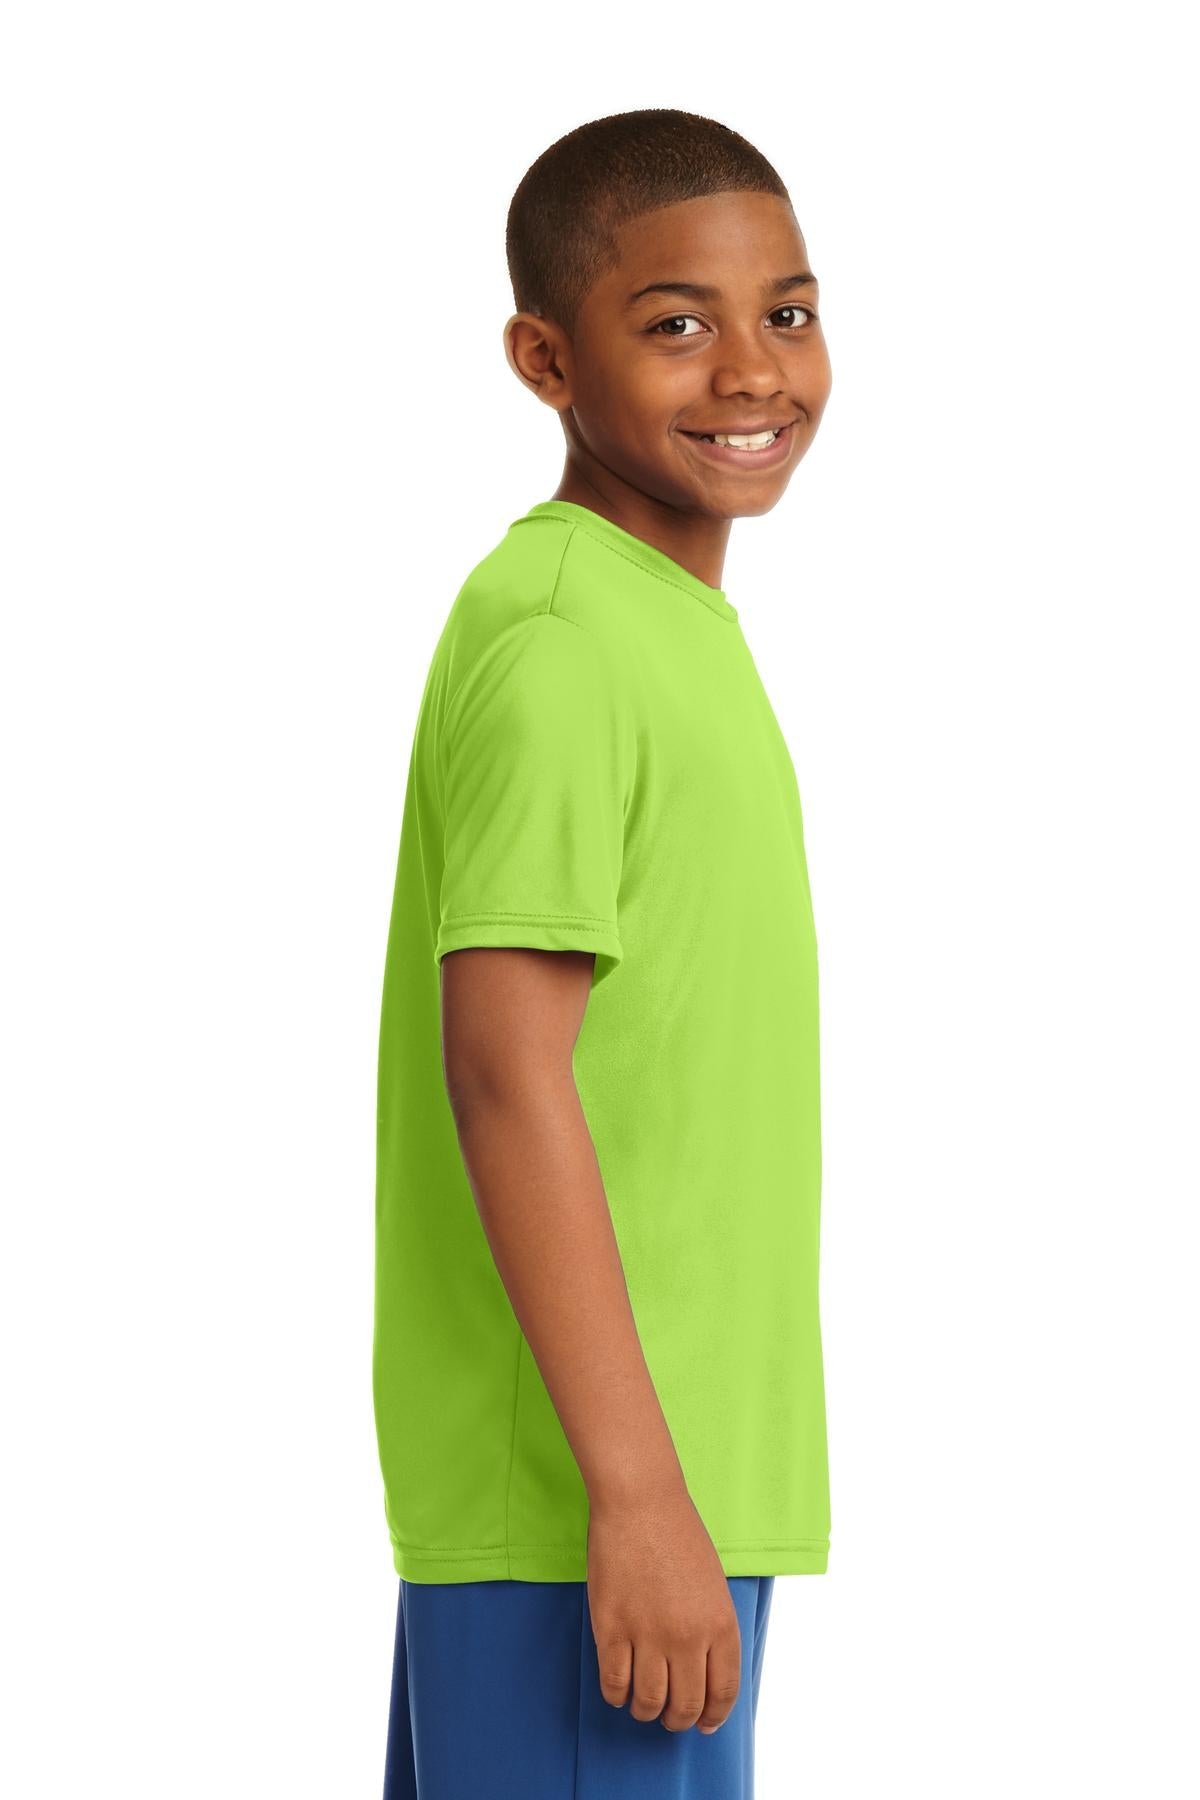 Sport-Tek® Youth PosiCharge® Competitor™ Tee. YST350 [Lime Shock] - DFW Impression